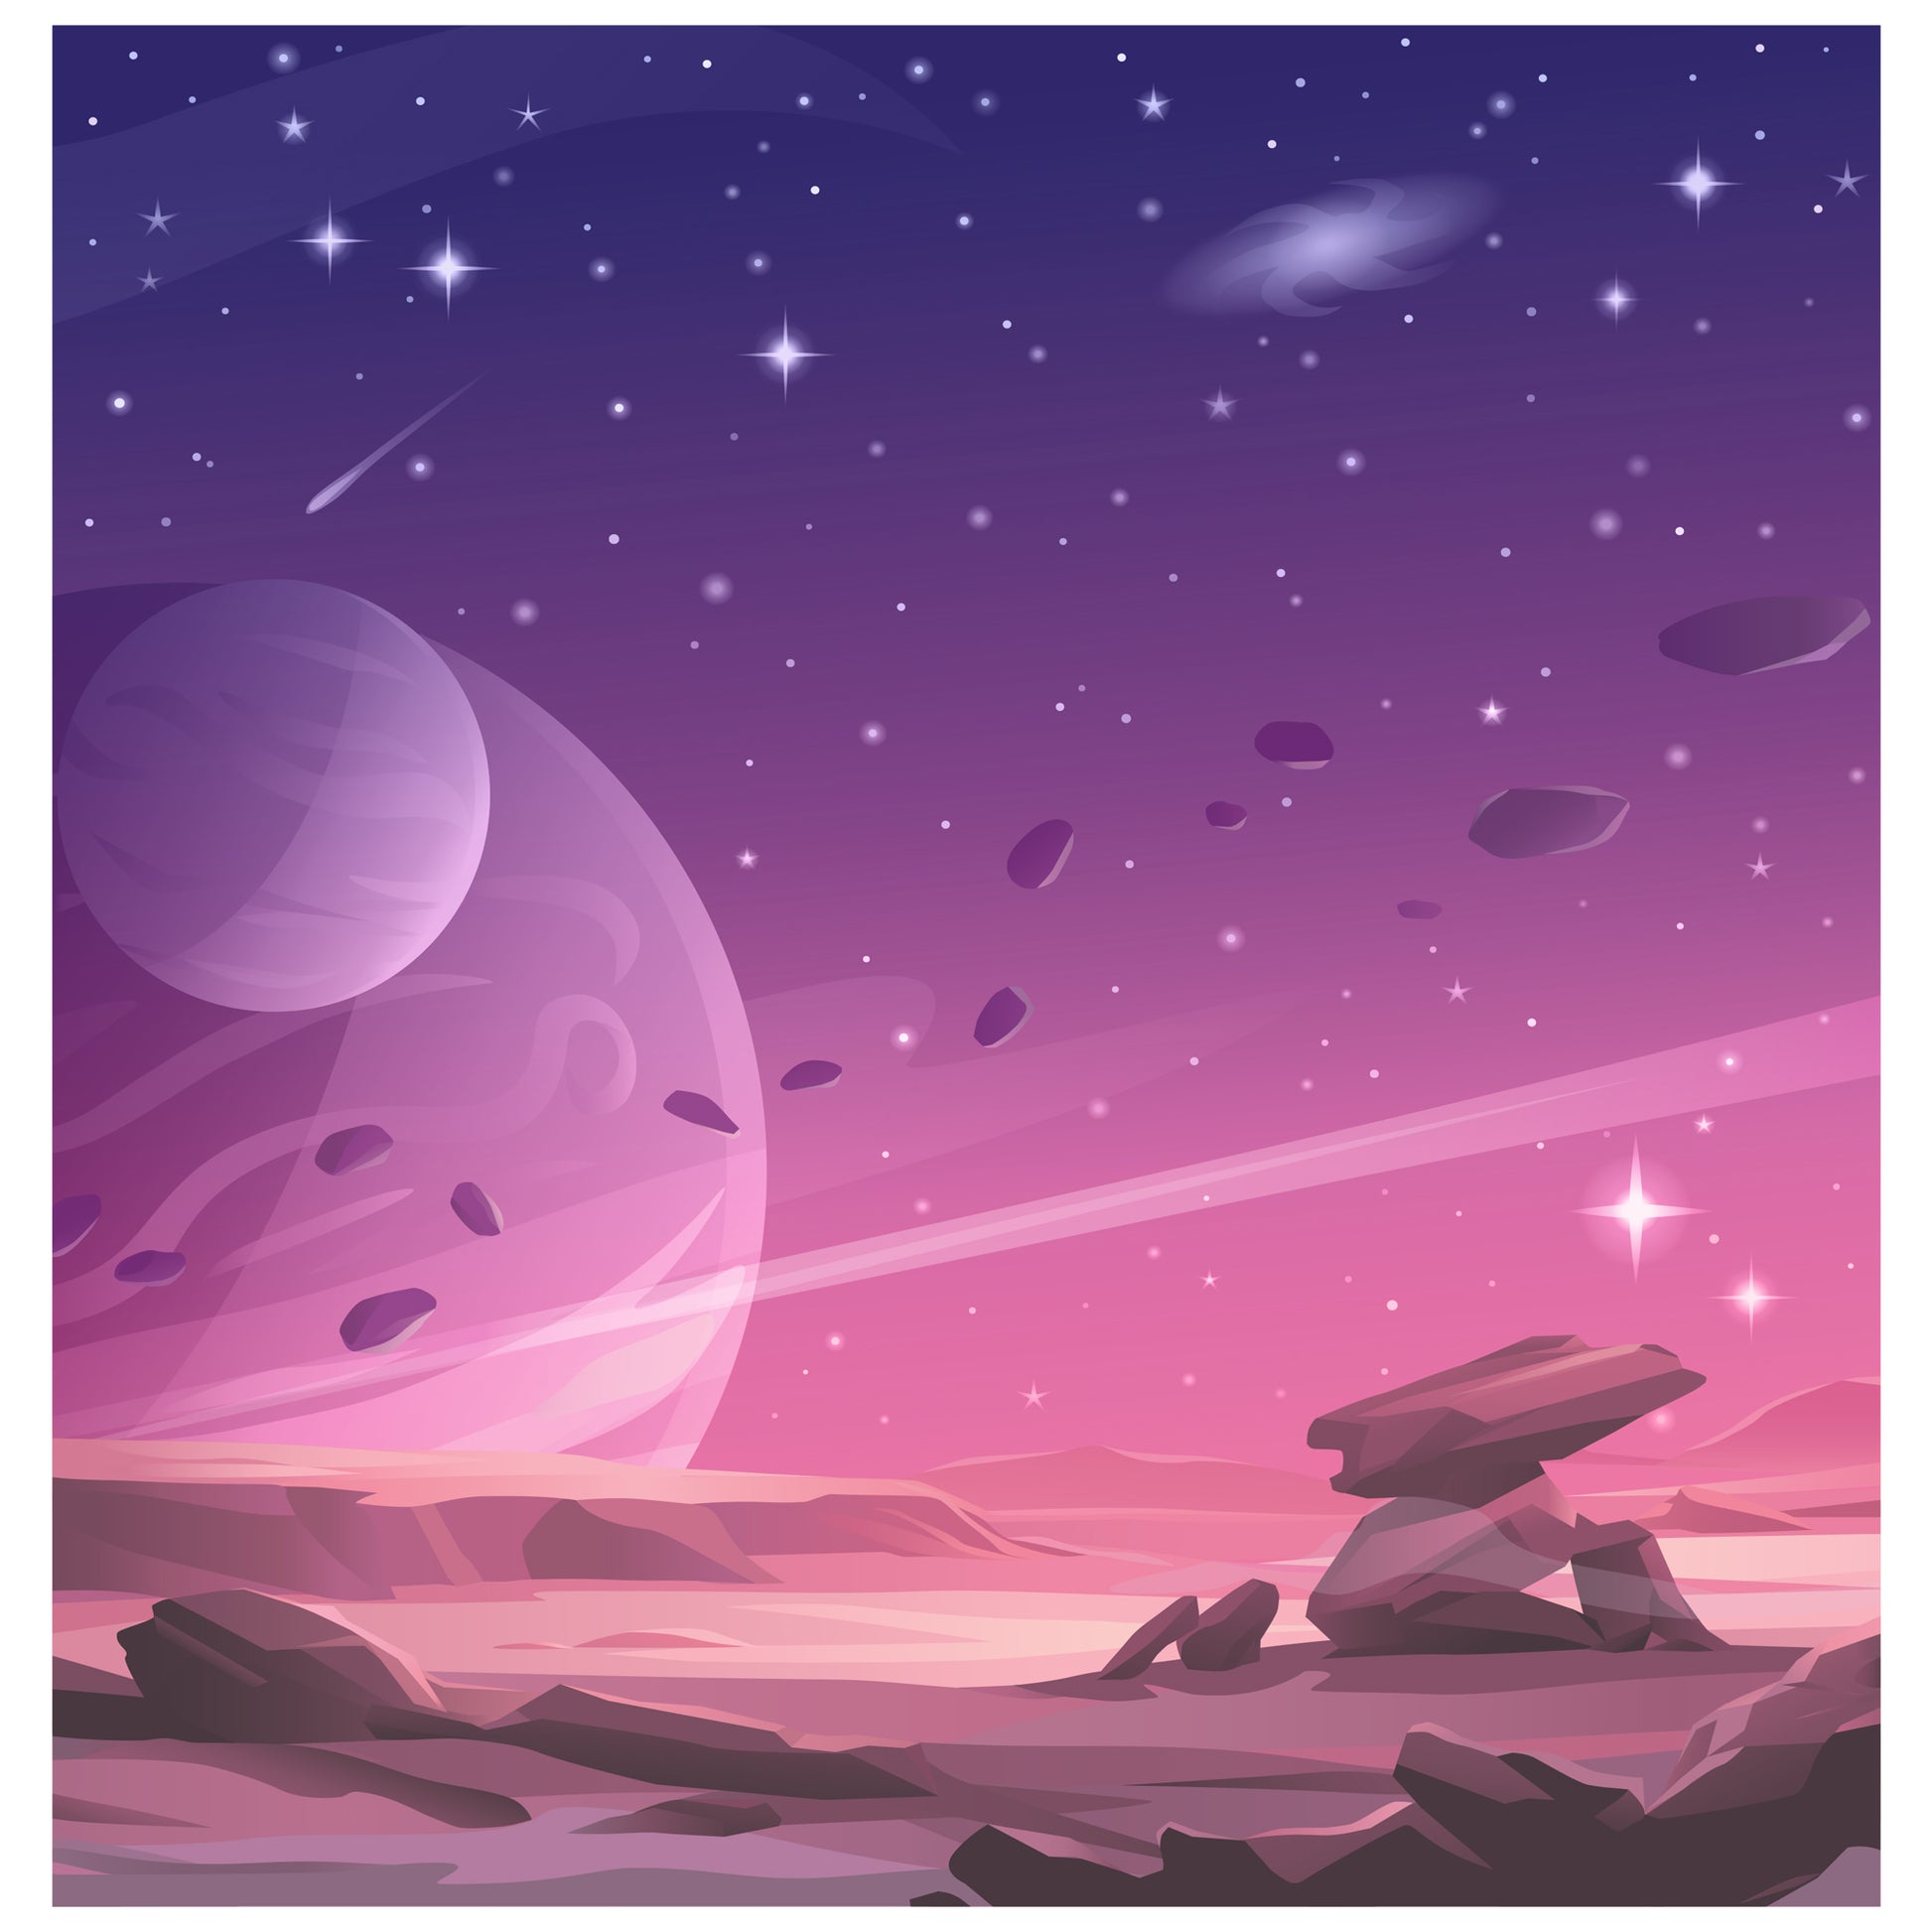 giant pink planet